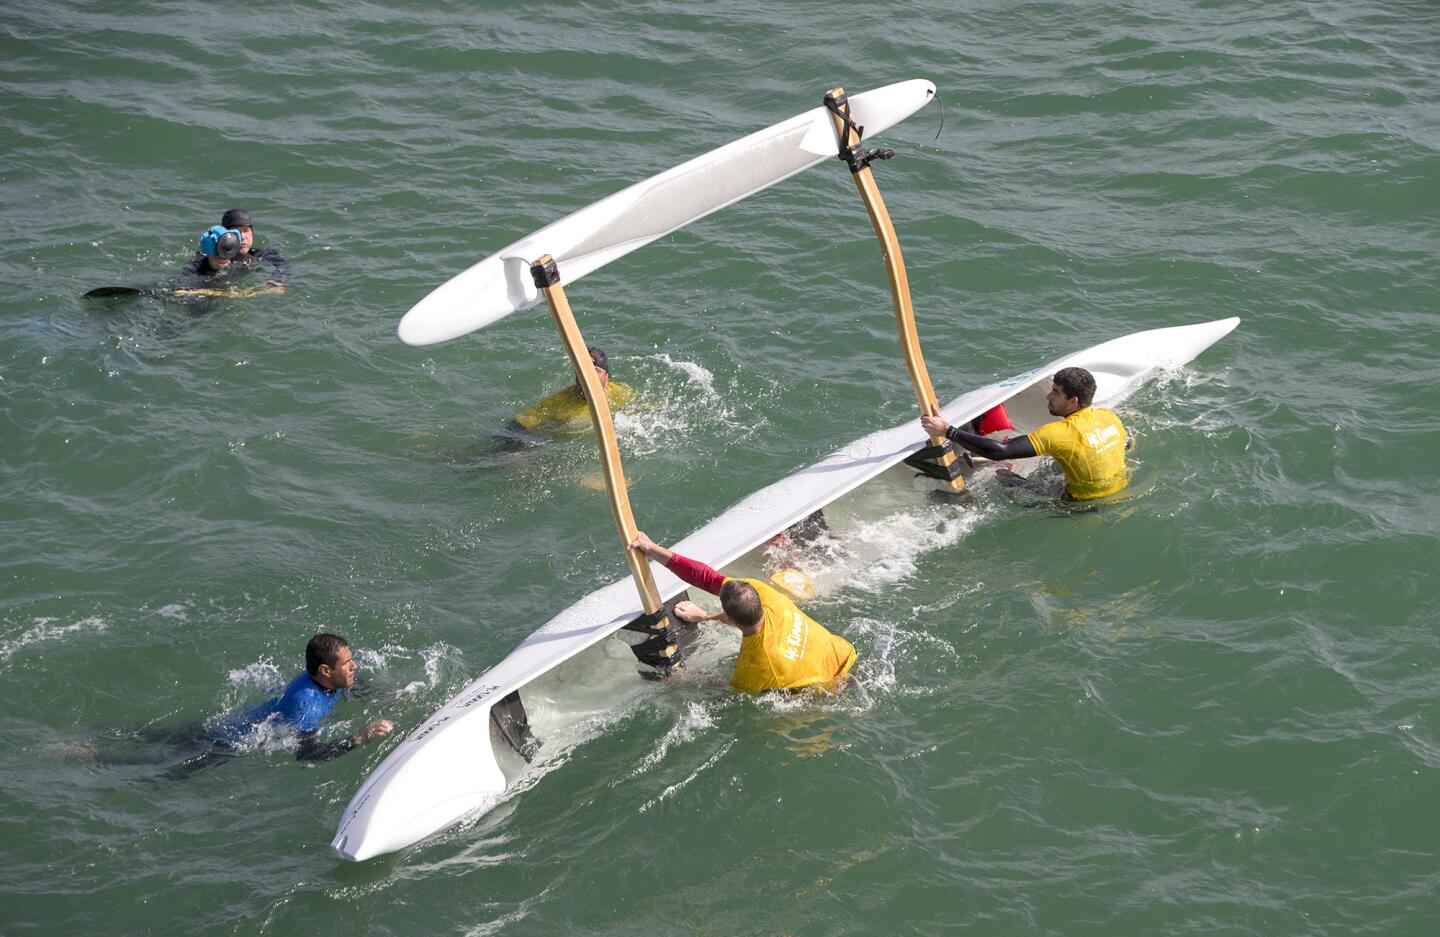 Outrigger surf canoe rides start at the Huntington Beach Pier